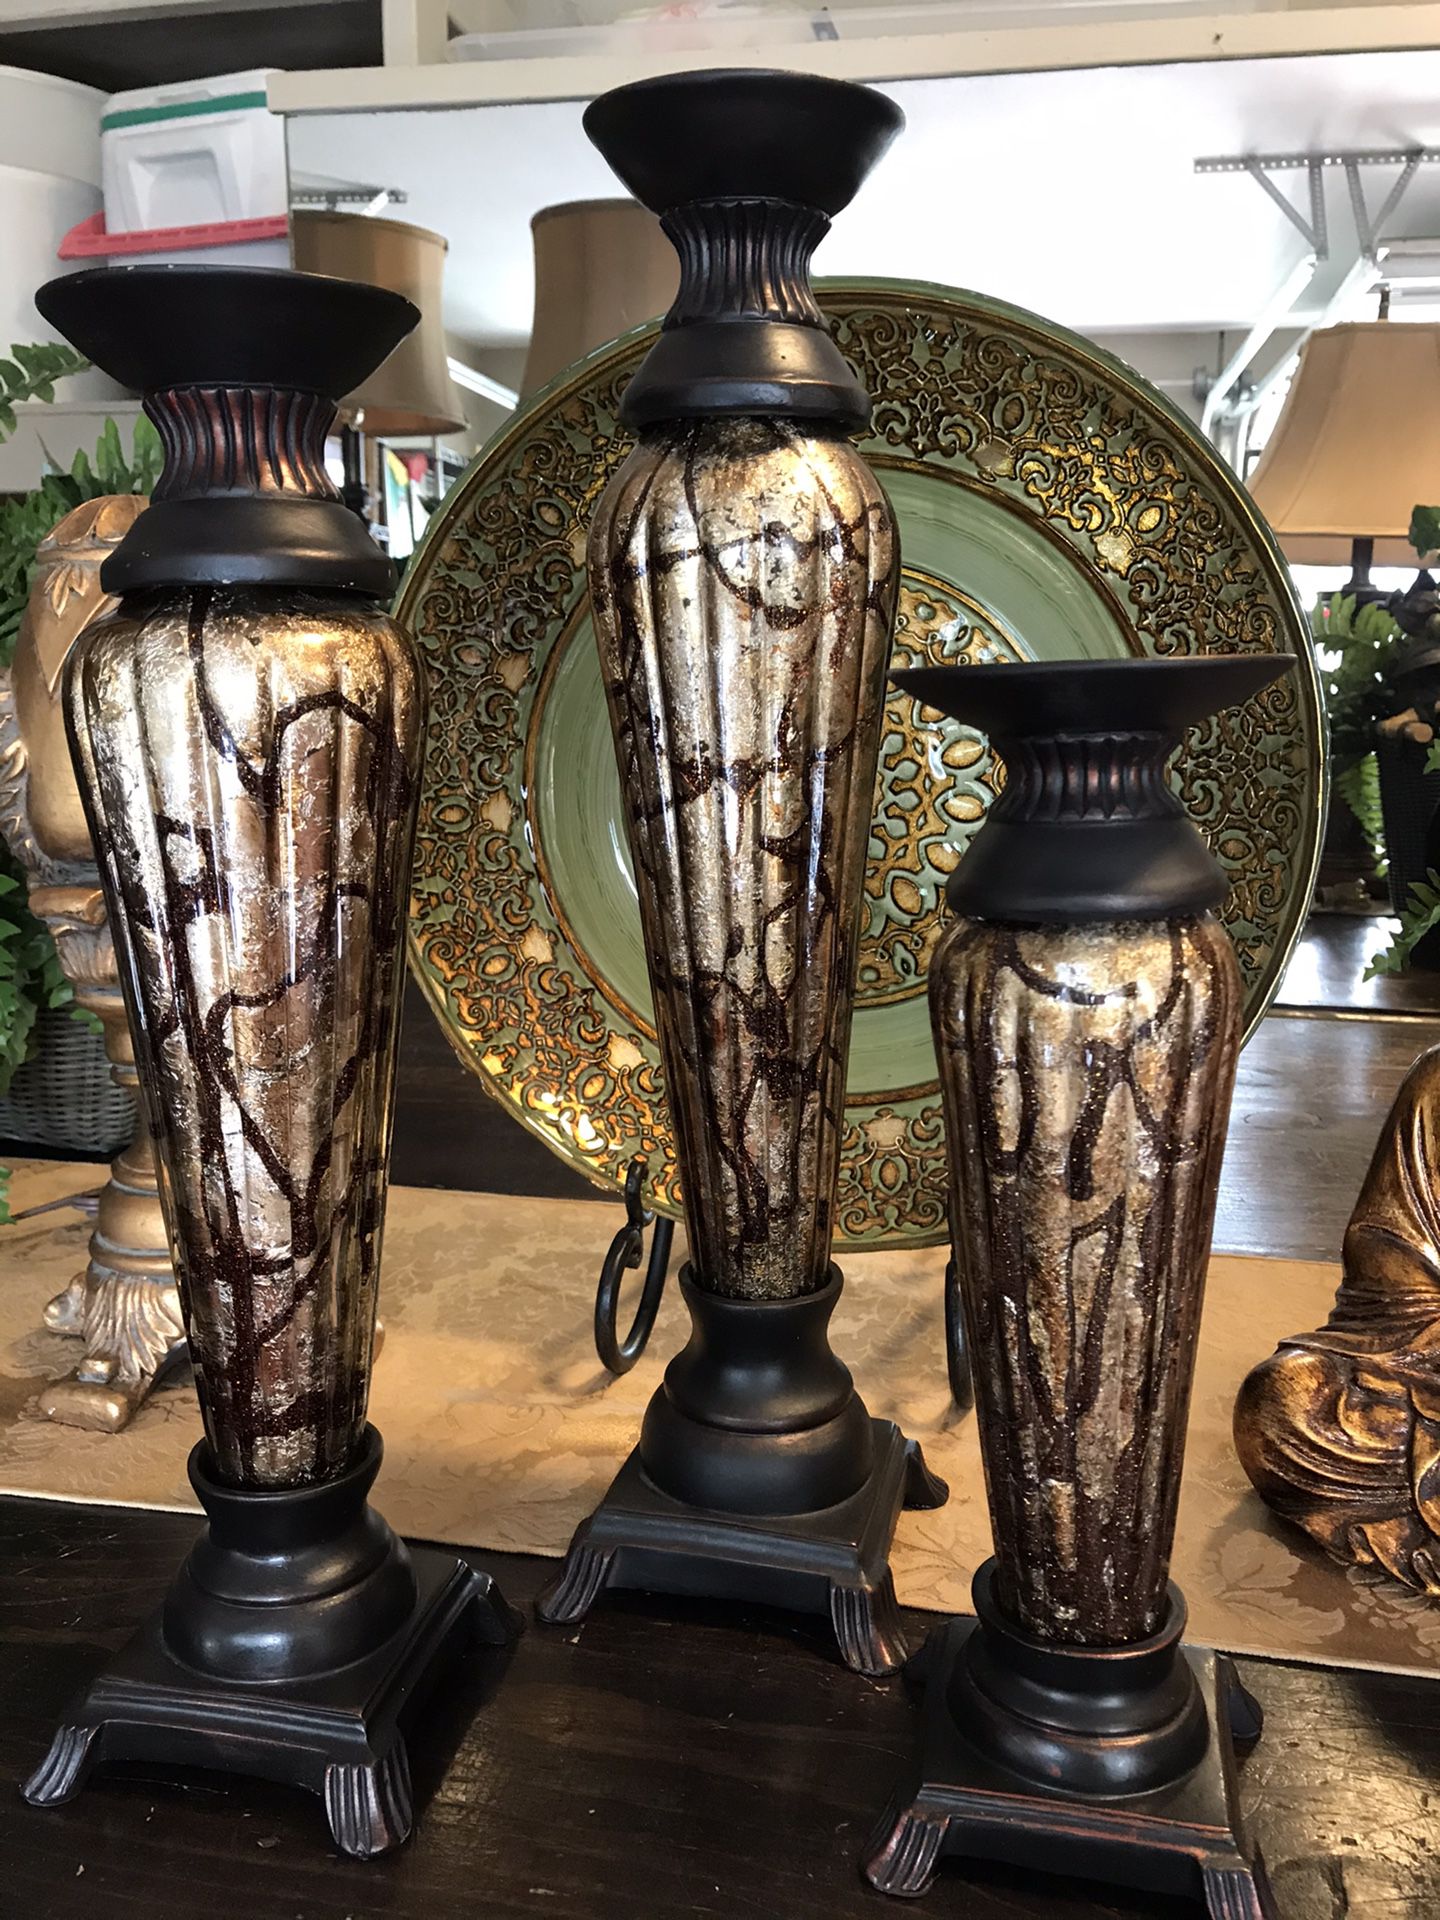 Gorgeous 3 piece gold / bronze marbleized glass candle holders 18, 15 1/2 & 12” in size like new